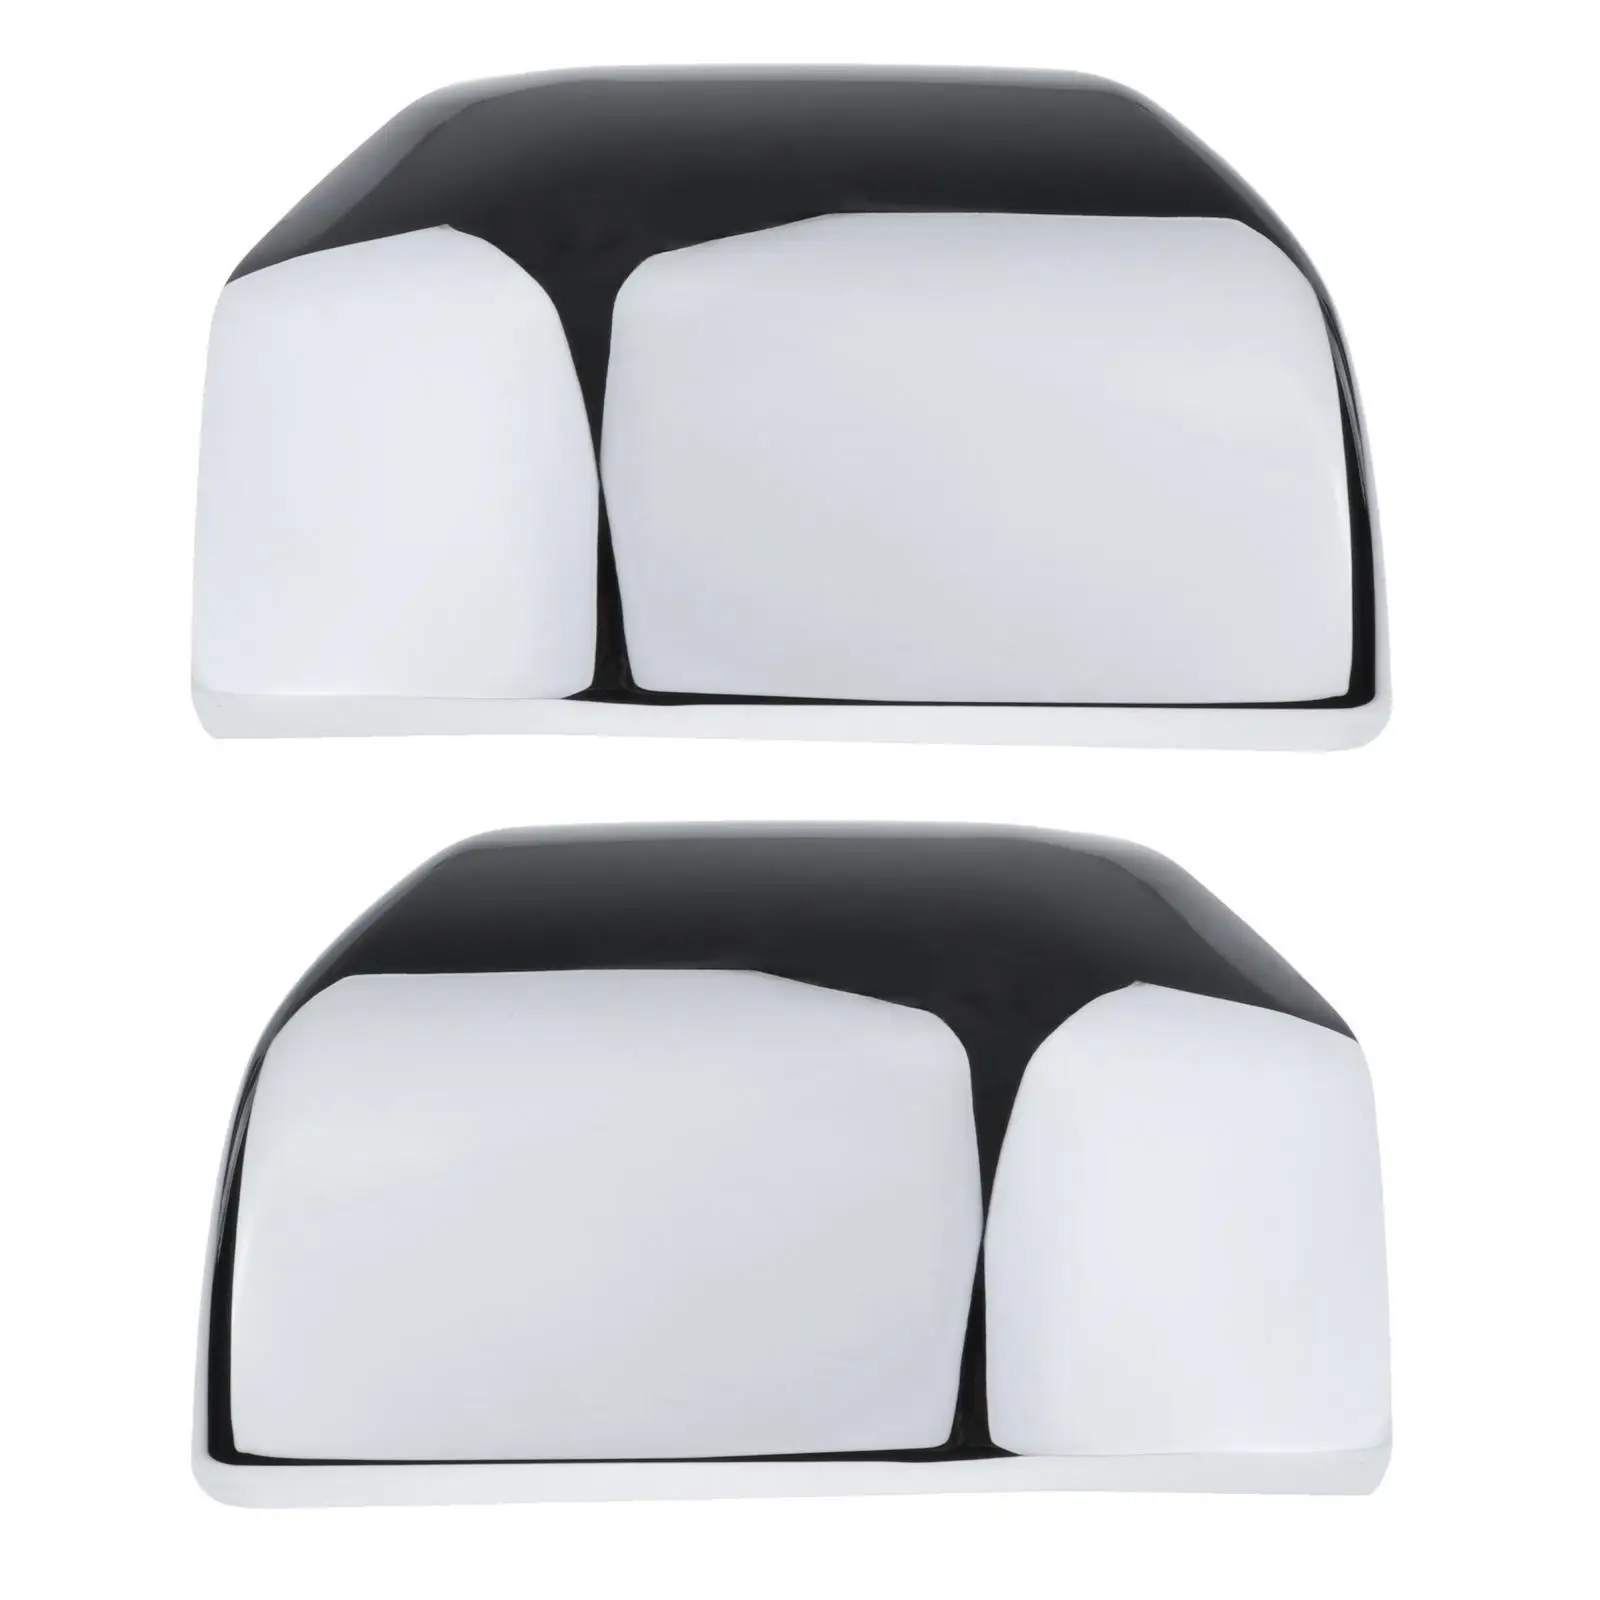 2x Car Rearview Mirror Cover Side Mirror Cover for 2015 Ford XL Standard Cab Pickup 2-Door